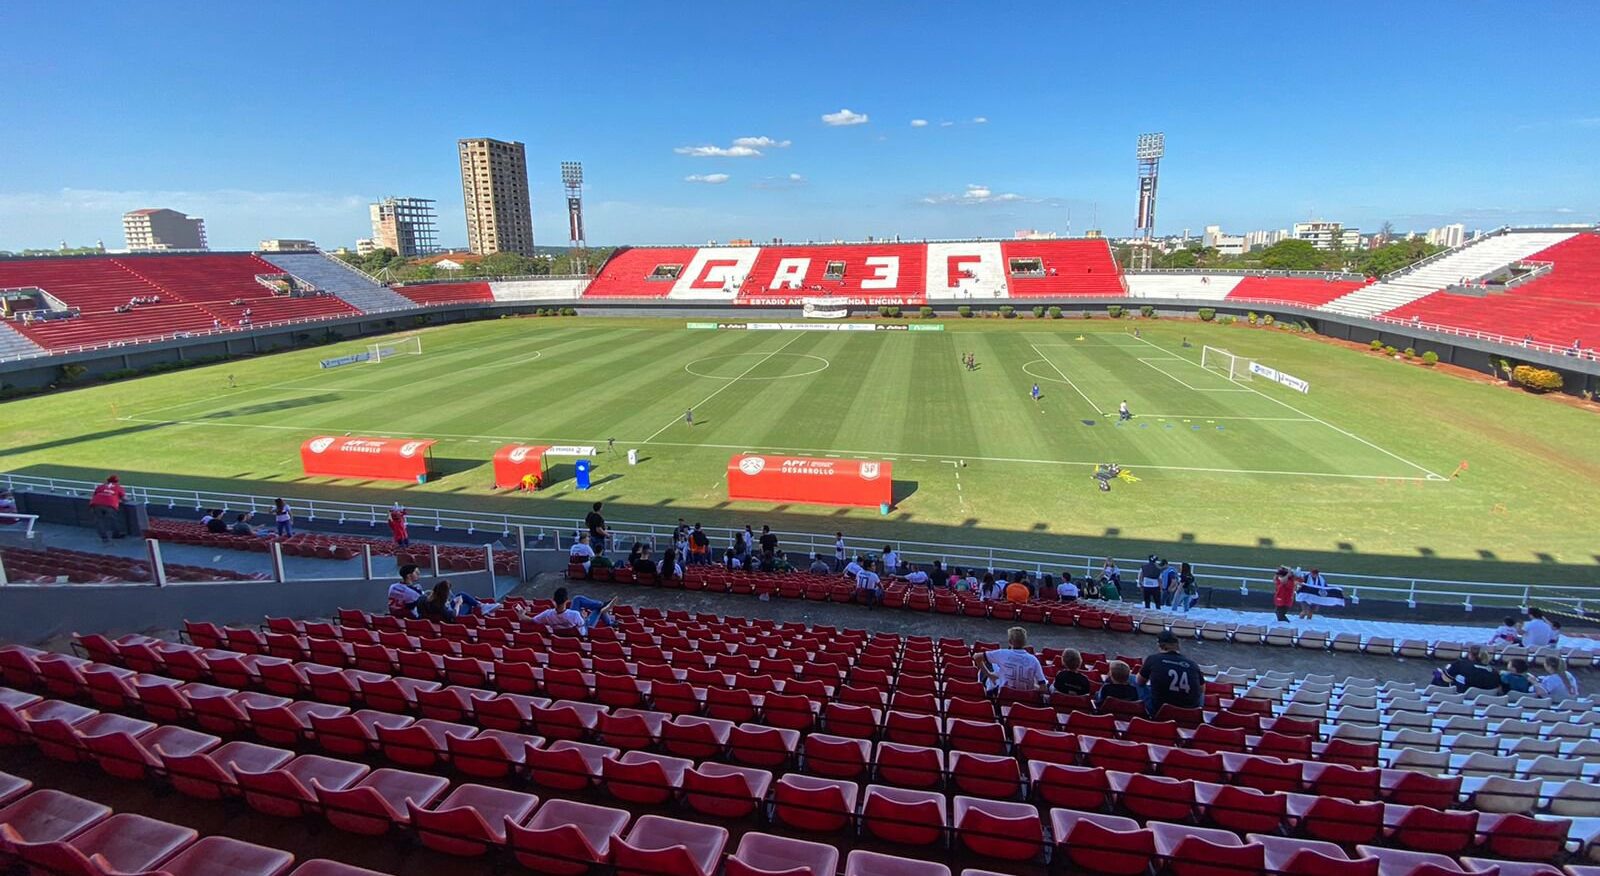 Tacuary, "in negotiations" to take Cerro Porteño to the east